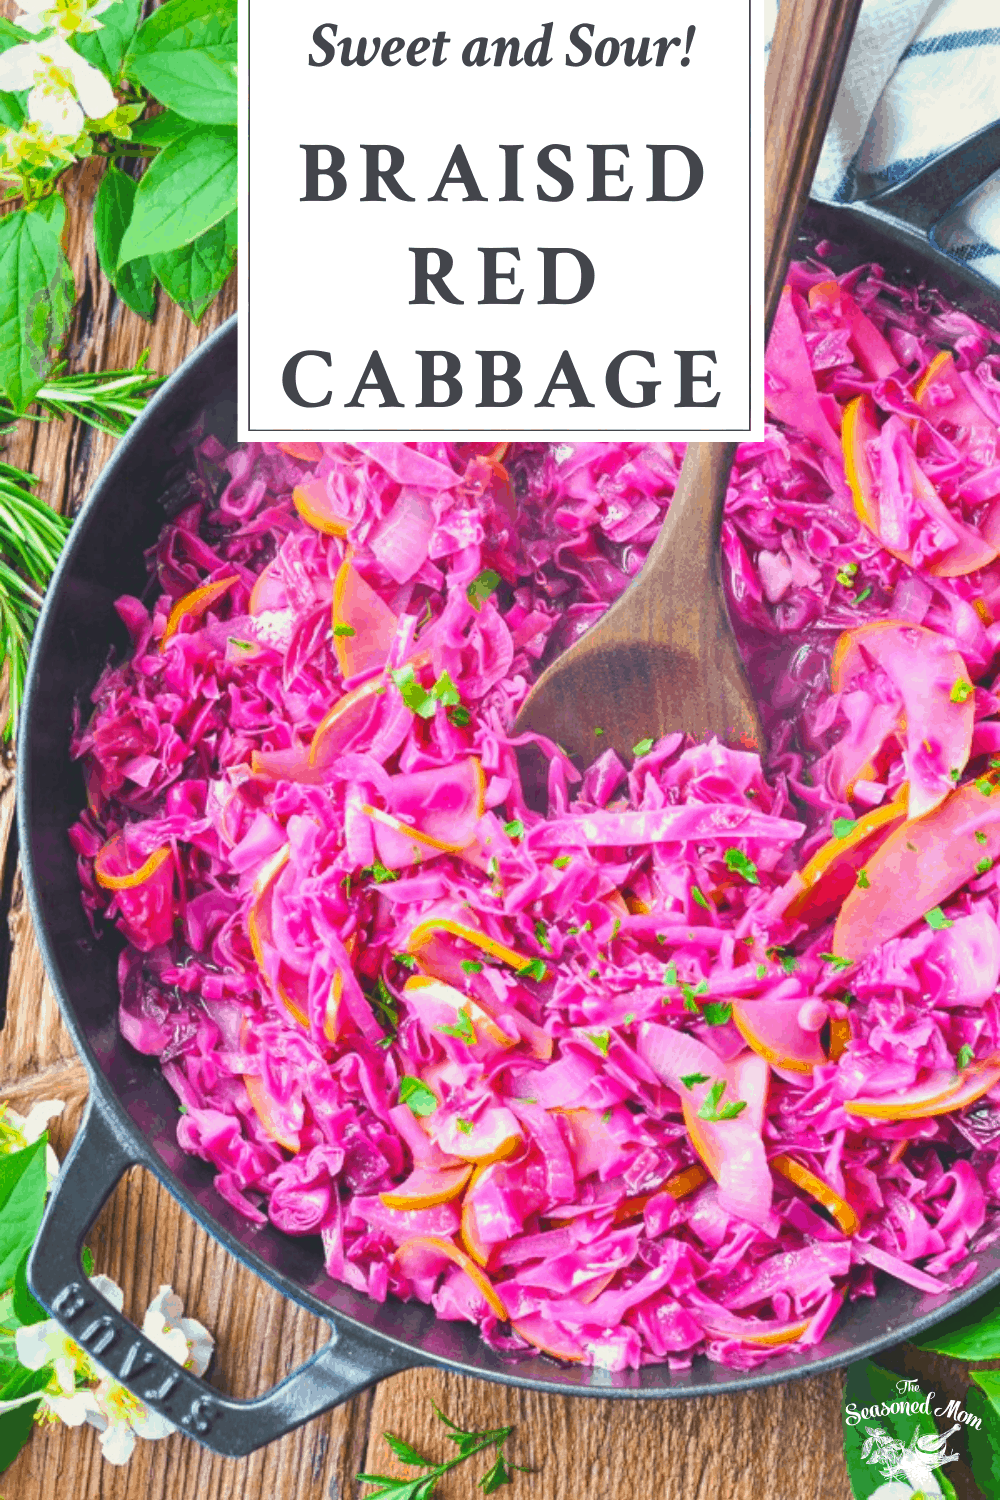 Braised Red Cabbage - The Seasoned Mom